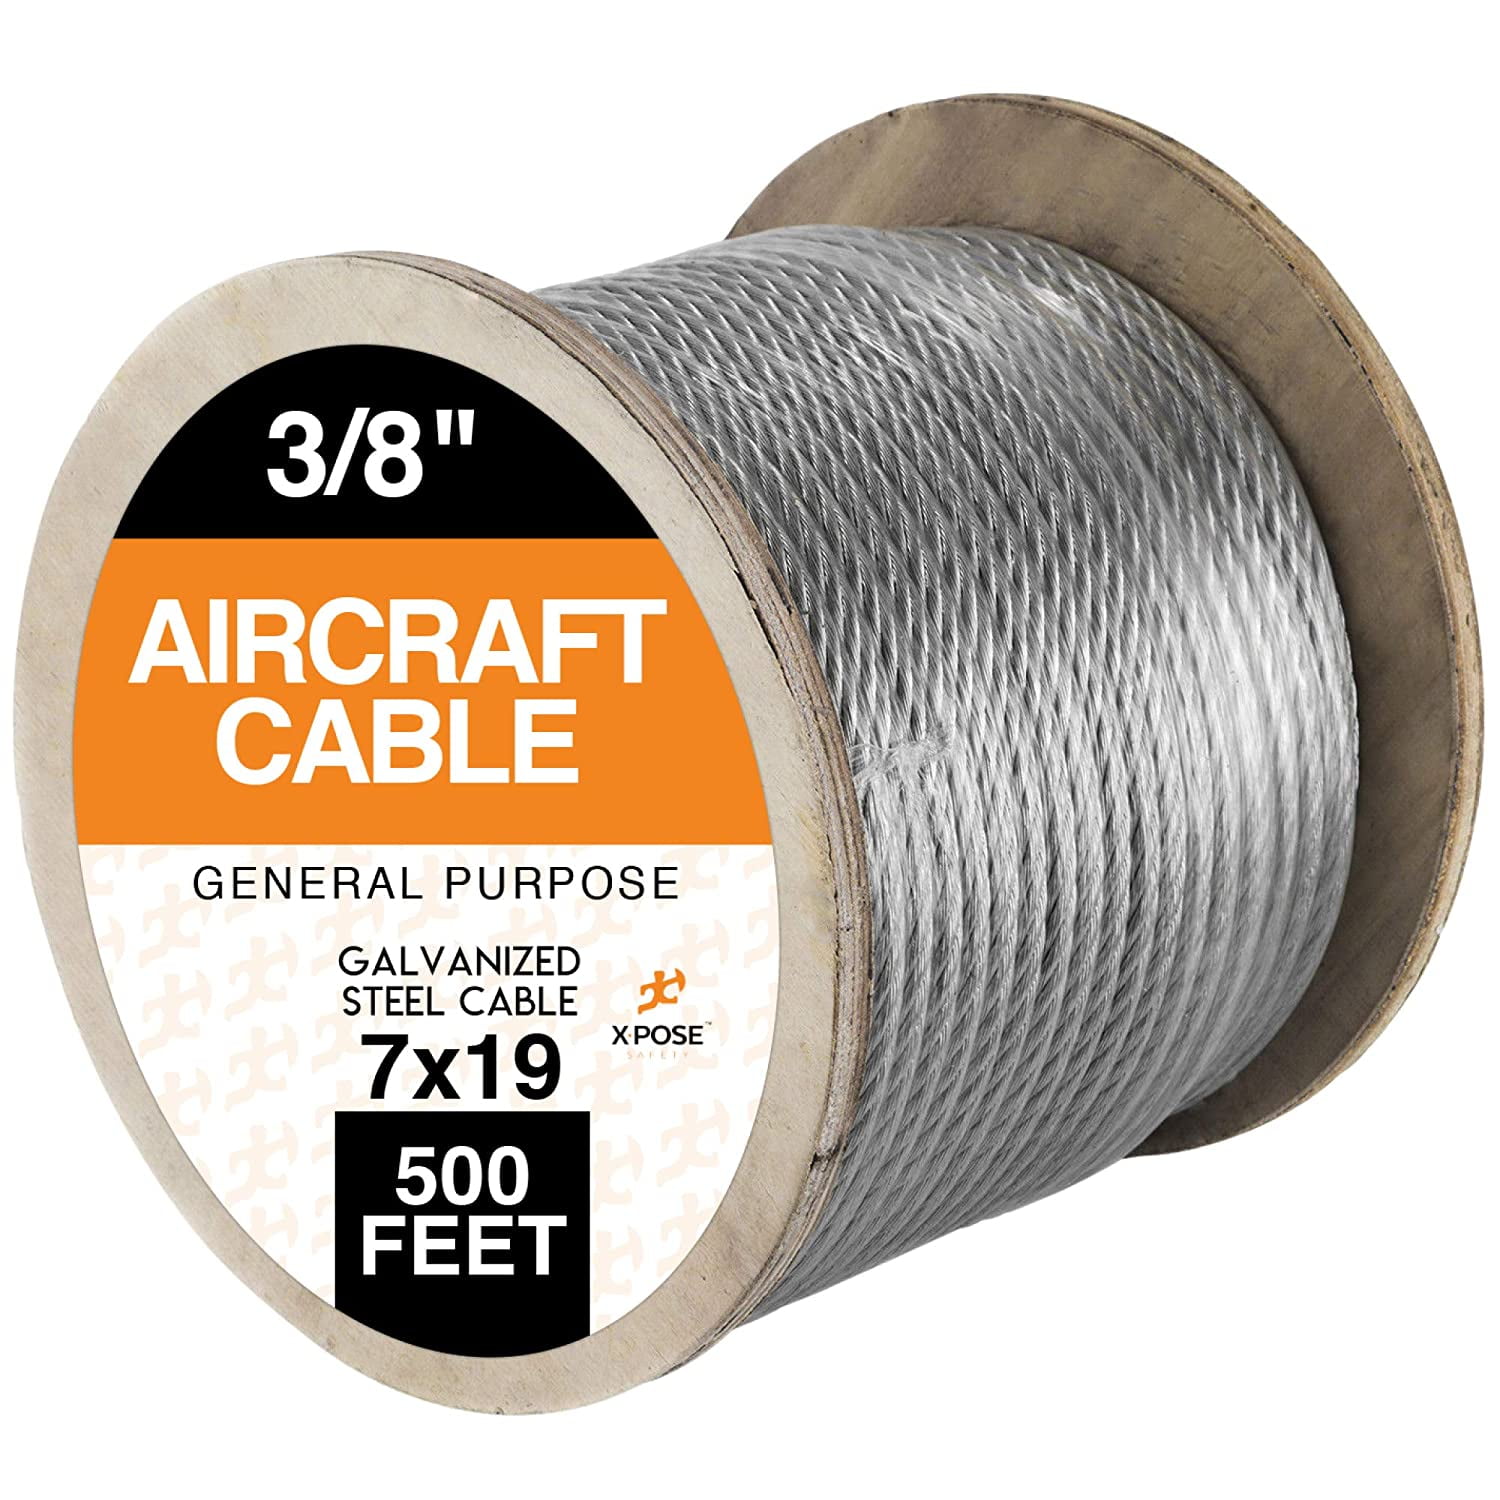 3/8 cable double ended military grade x 4 1/2 feet long loop to loop with eyelet 